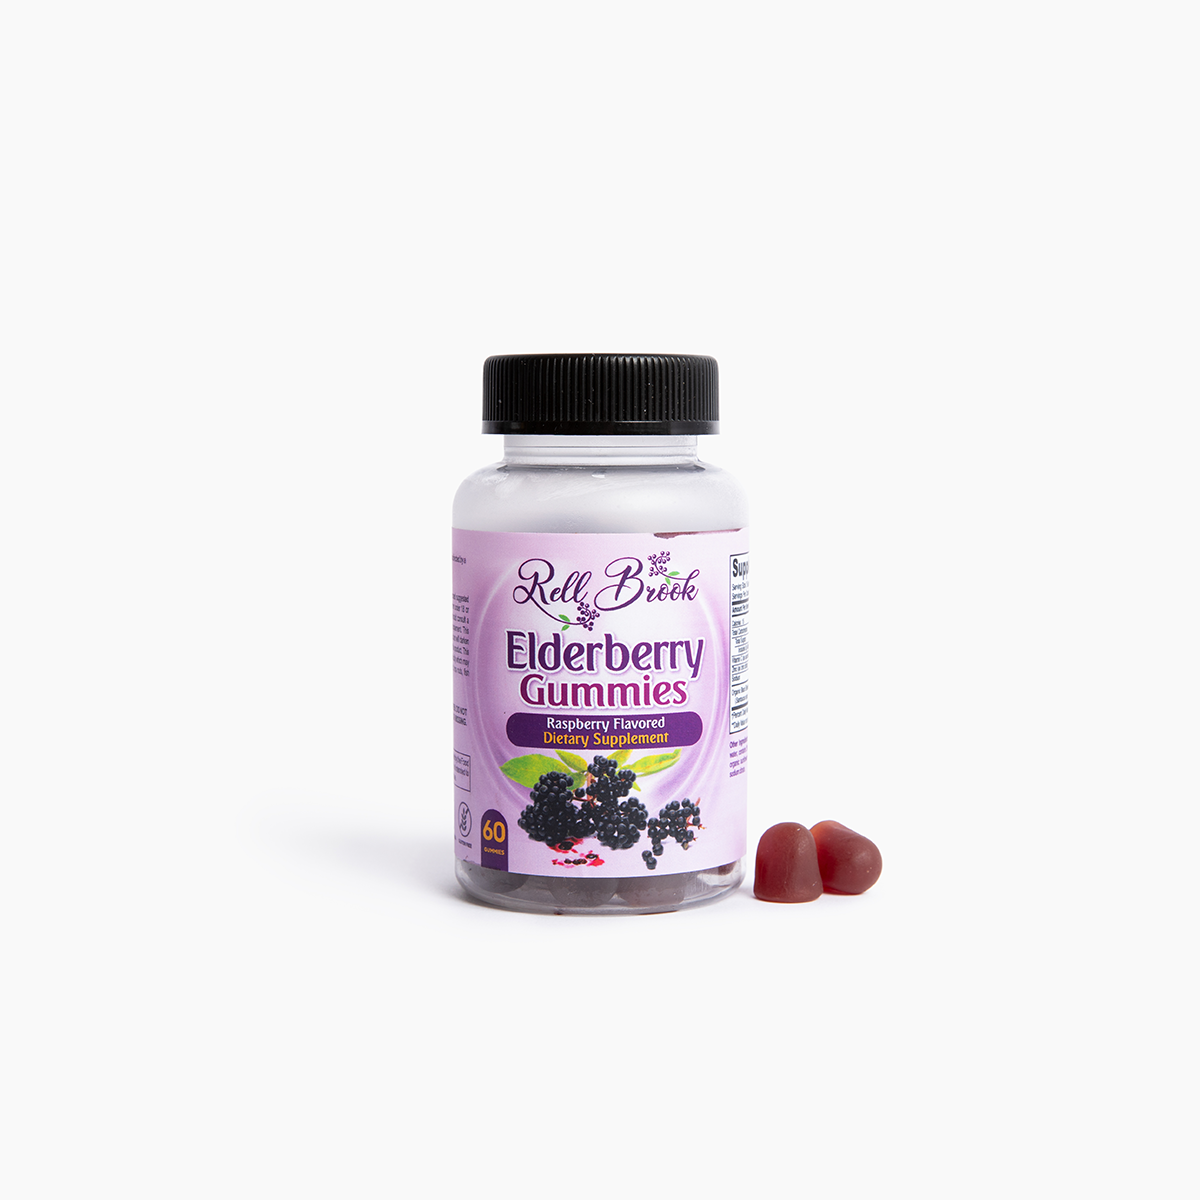 All Products - Organic Elderberry Products and Supplements